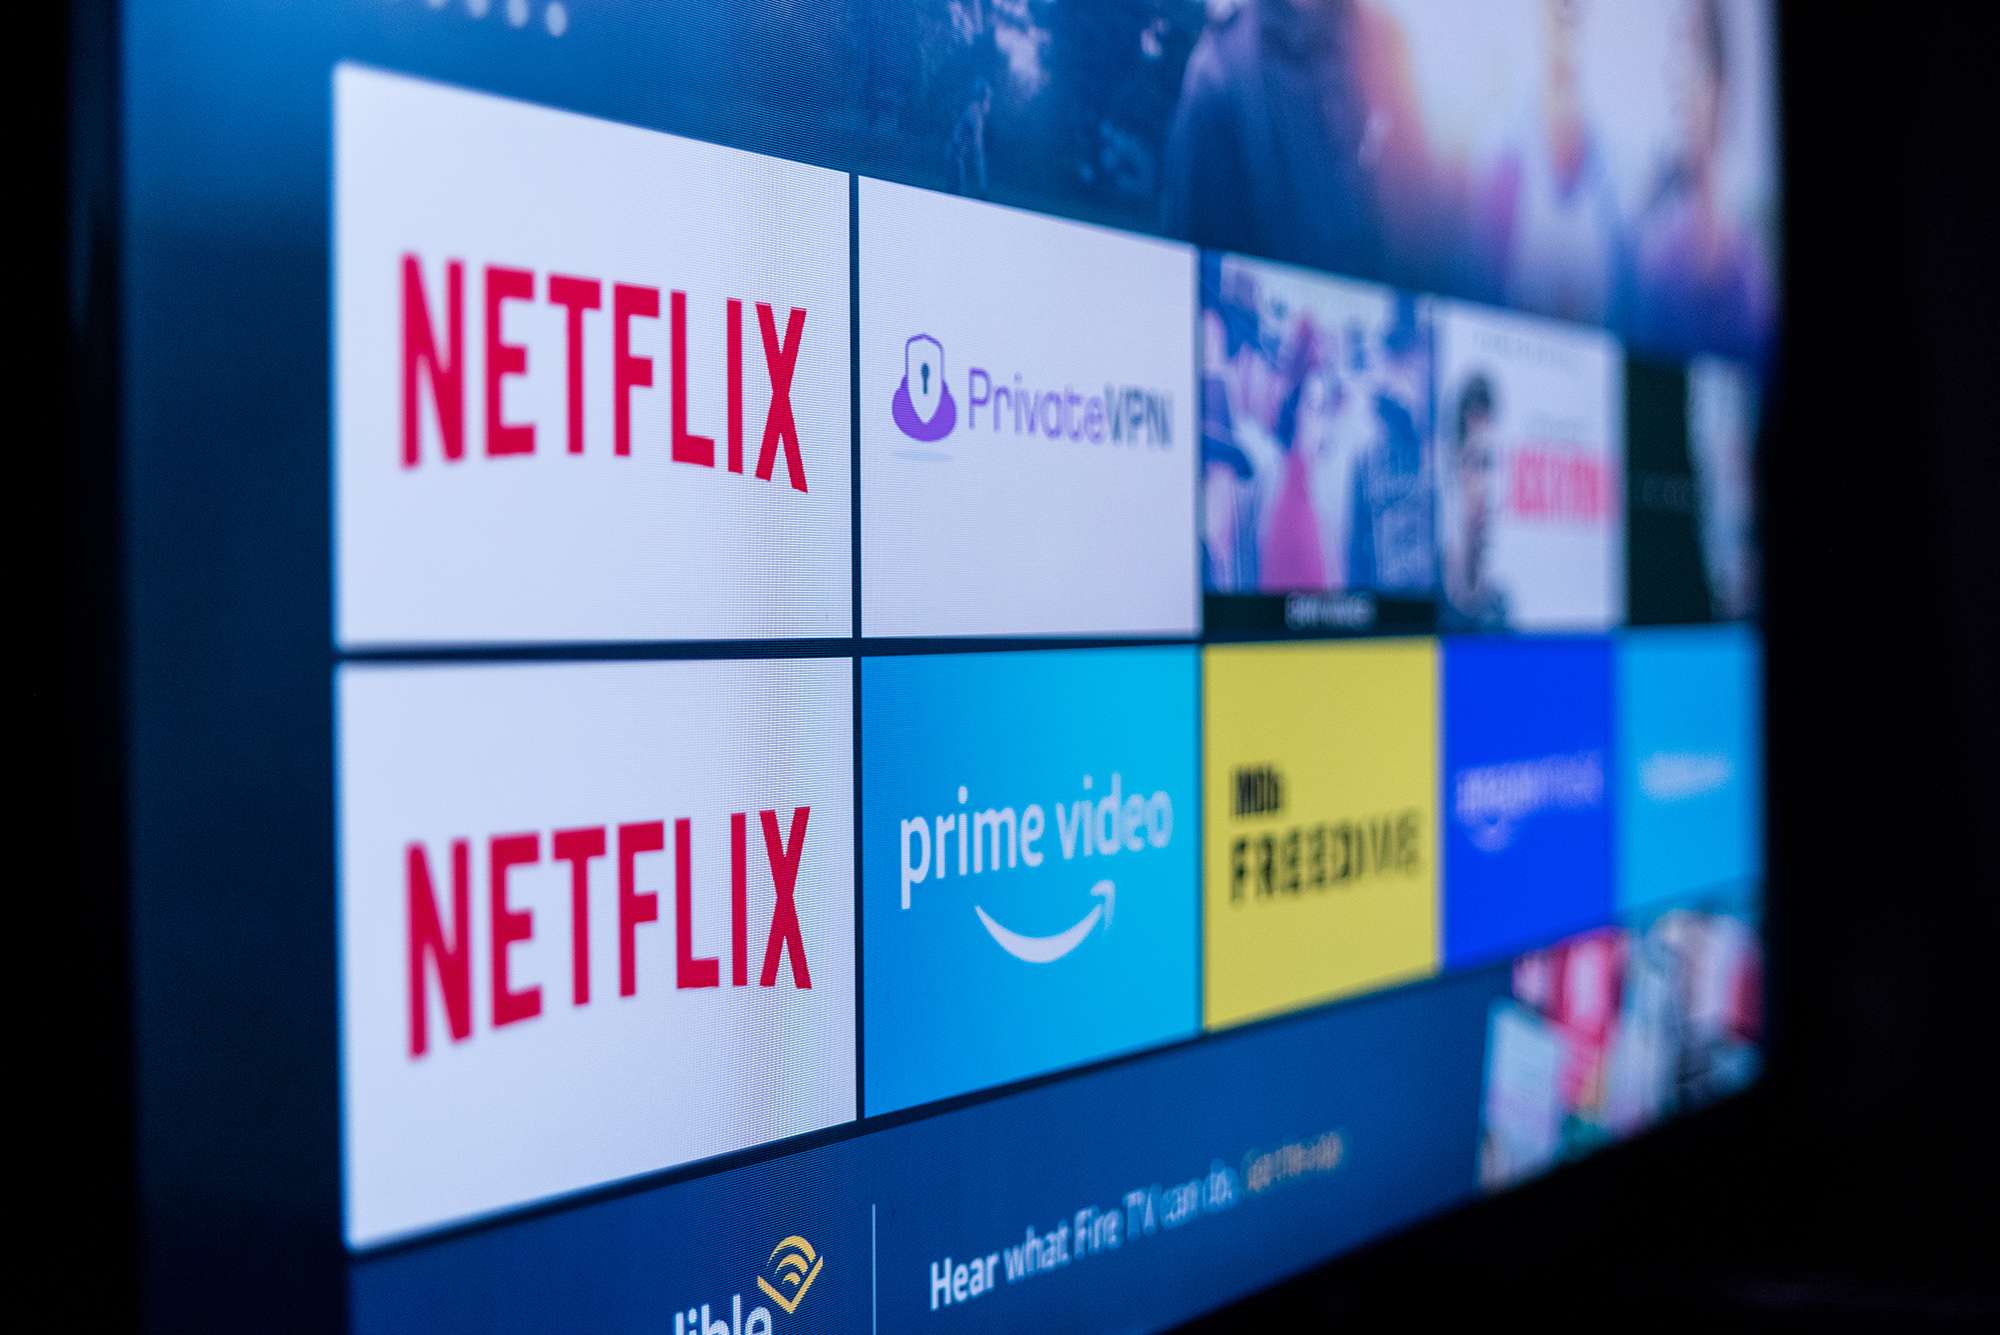 How To Watch Netflix Without A Smart TV